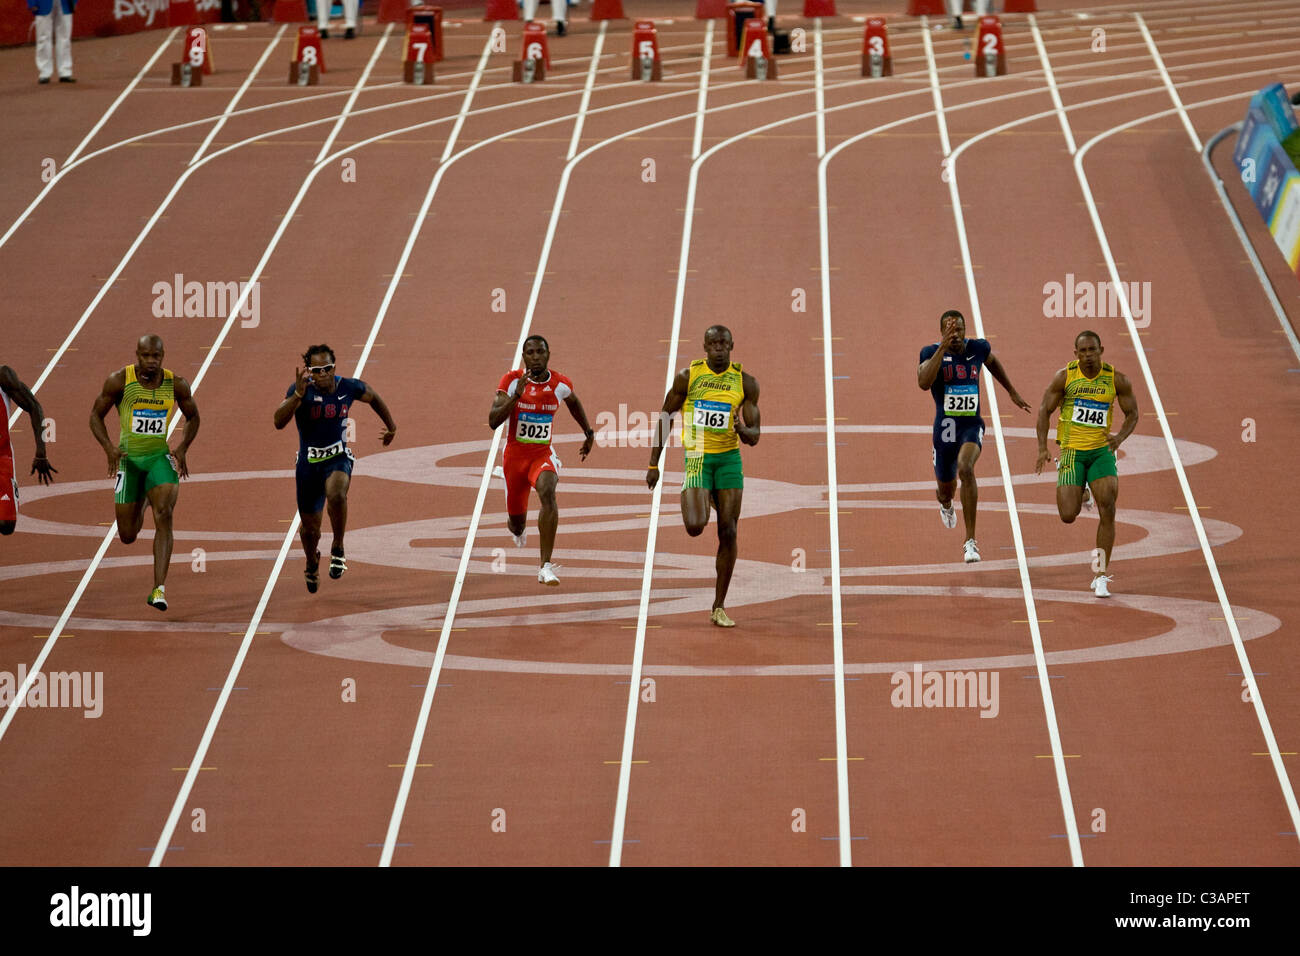 Usain Bolt wins the 100m in world record time of 9.69 seconds at the 2008 Olympic Summer Games, Beijing, China Stock Photo